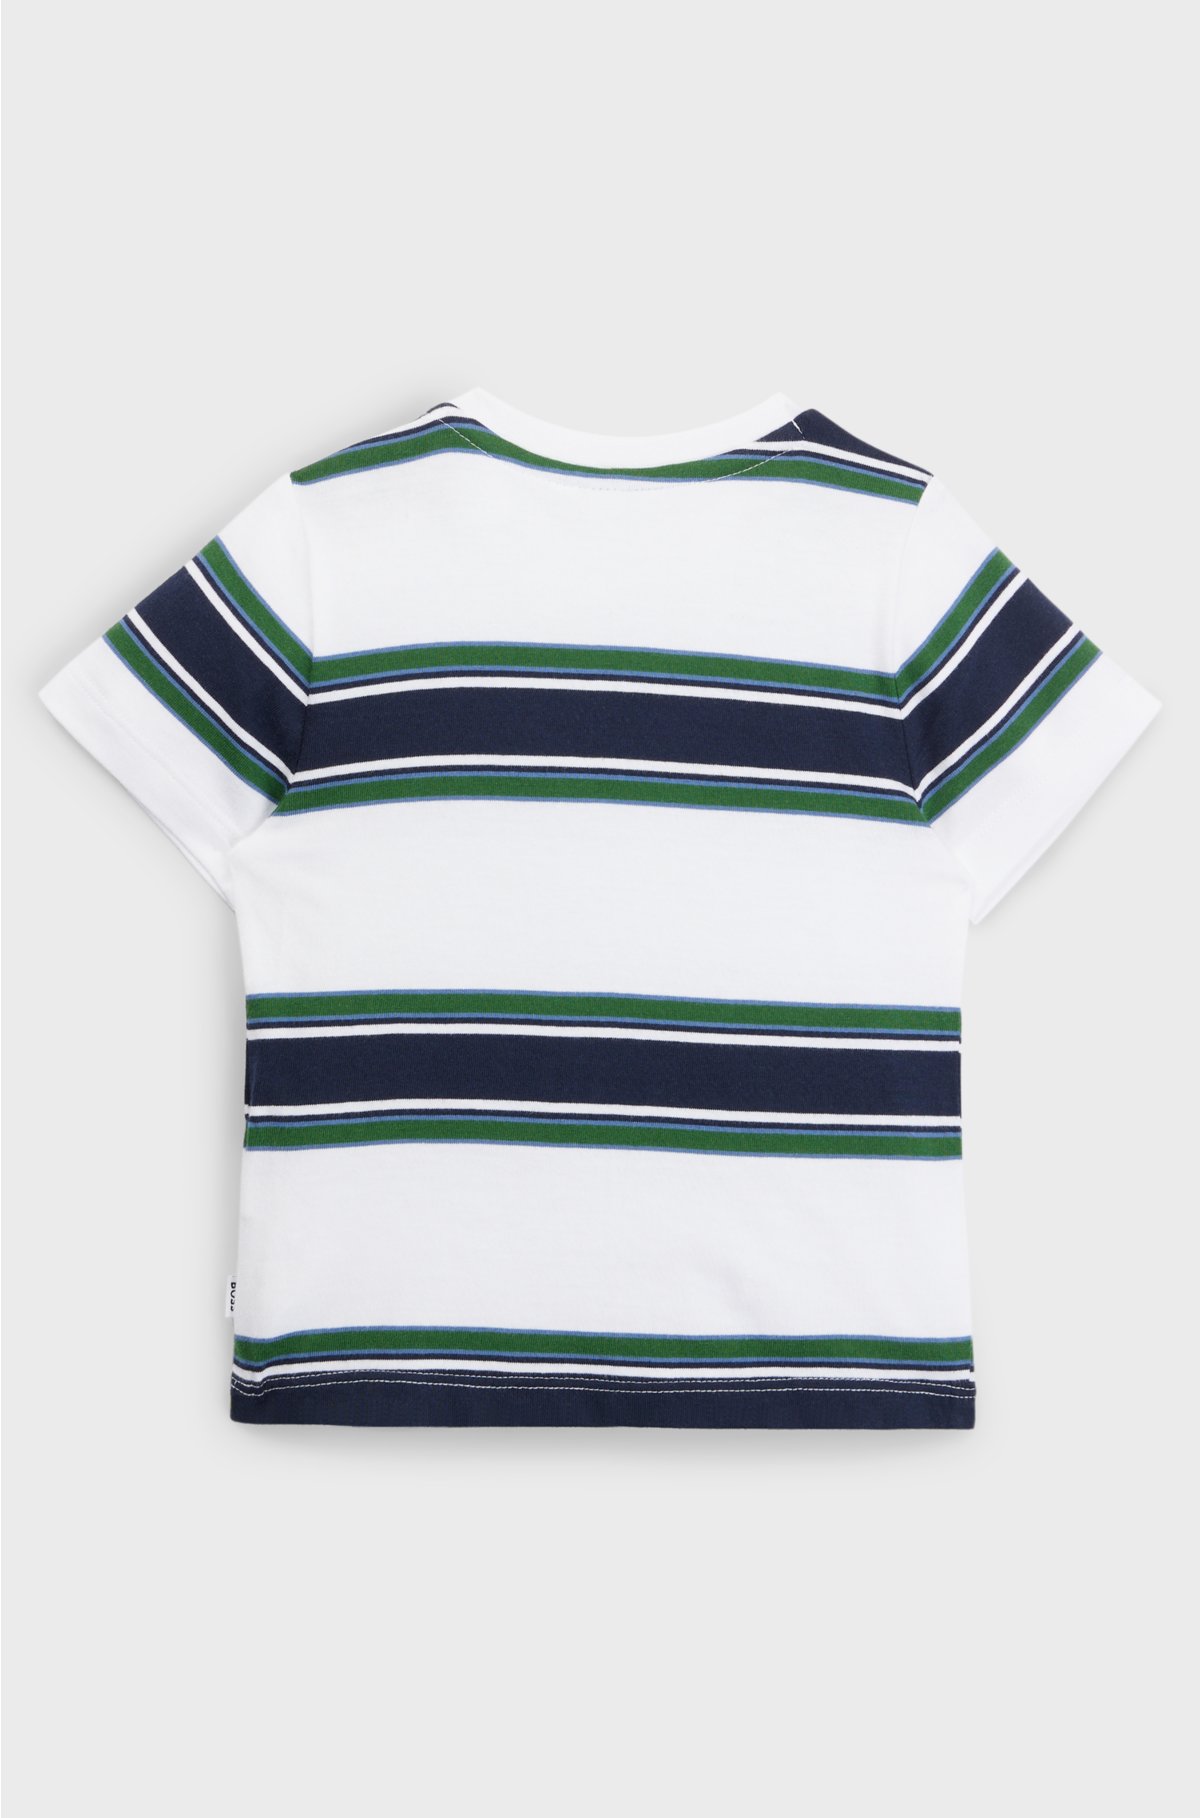 Kids' cotton-jersey T-shirt with stripes and logo, Patterned